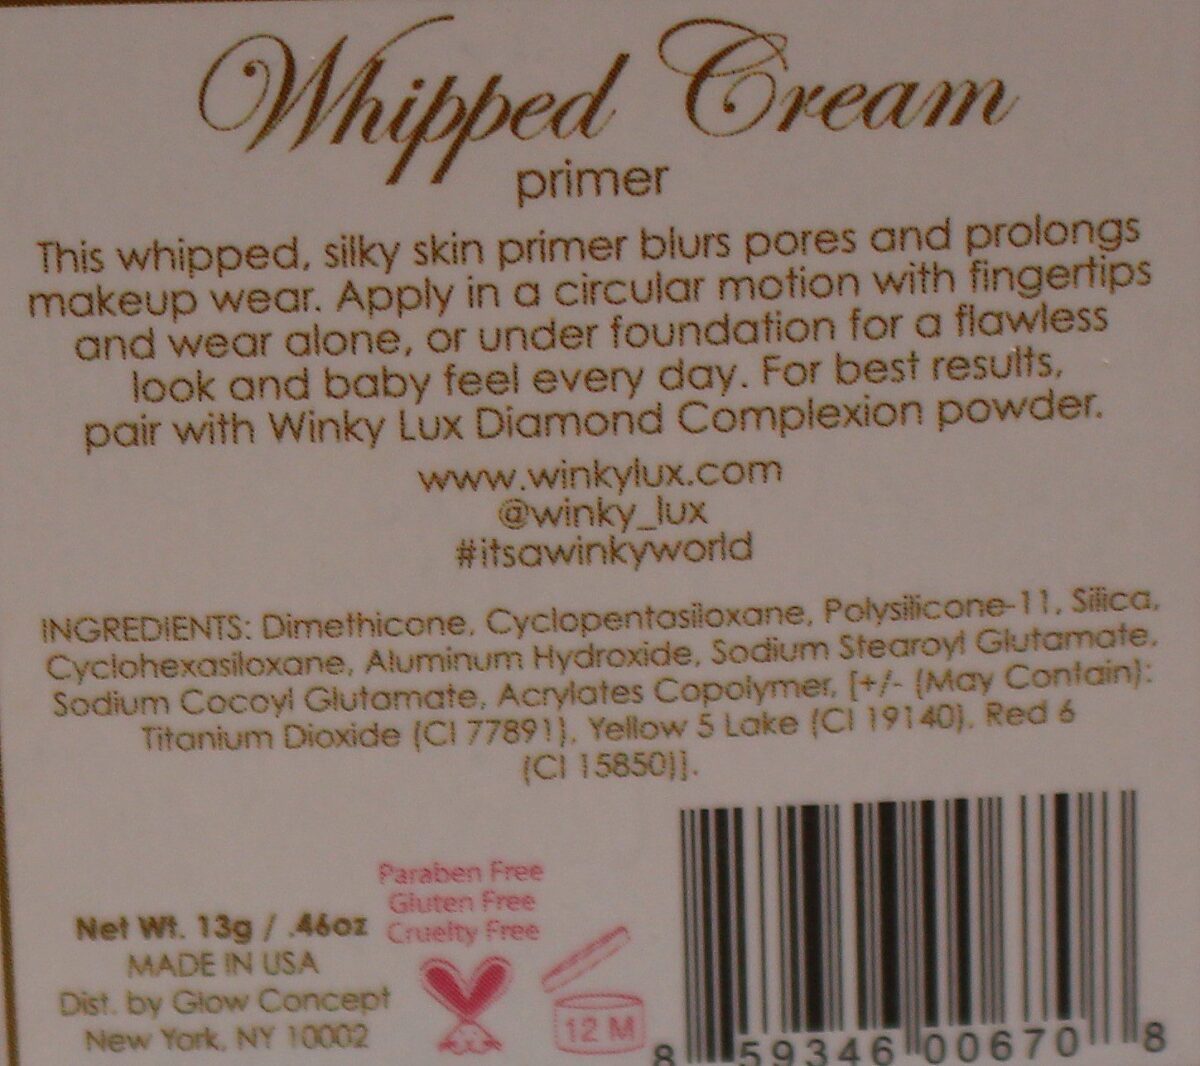 Winky-Lux-whipped-cream-primer-ingredients